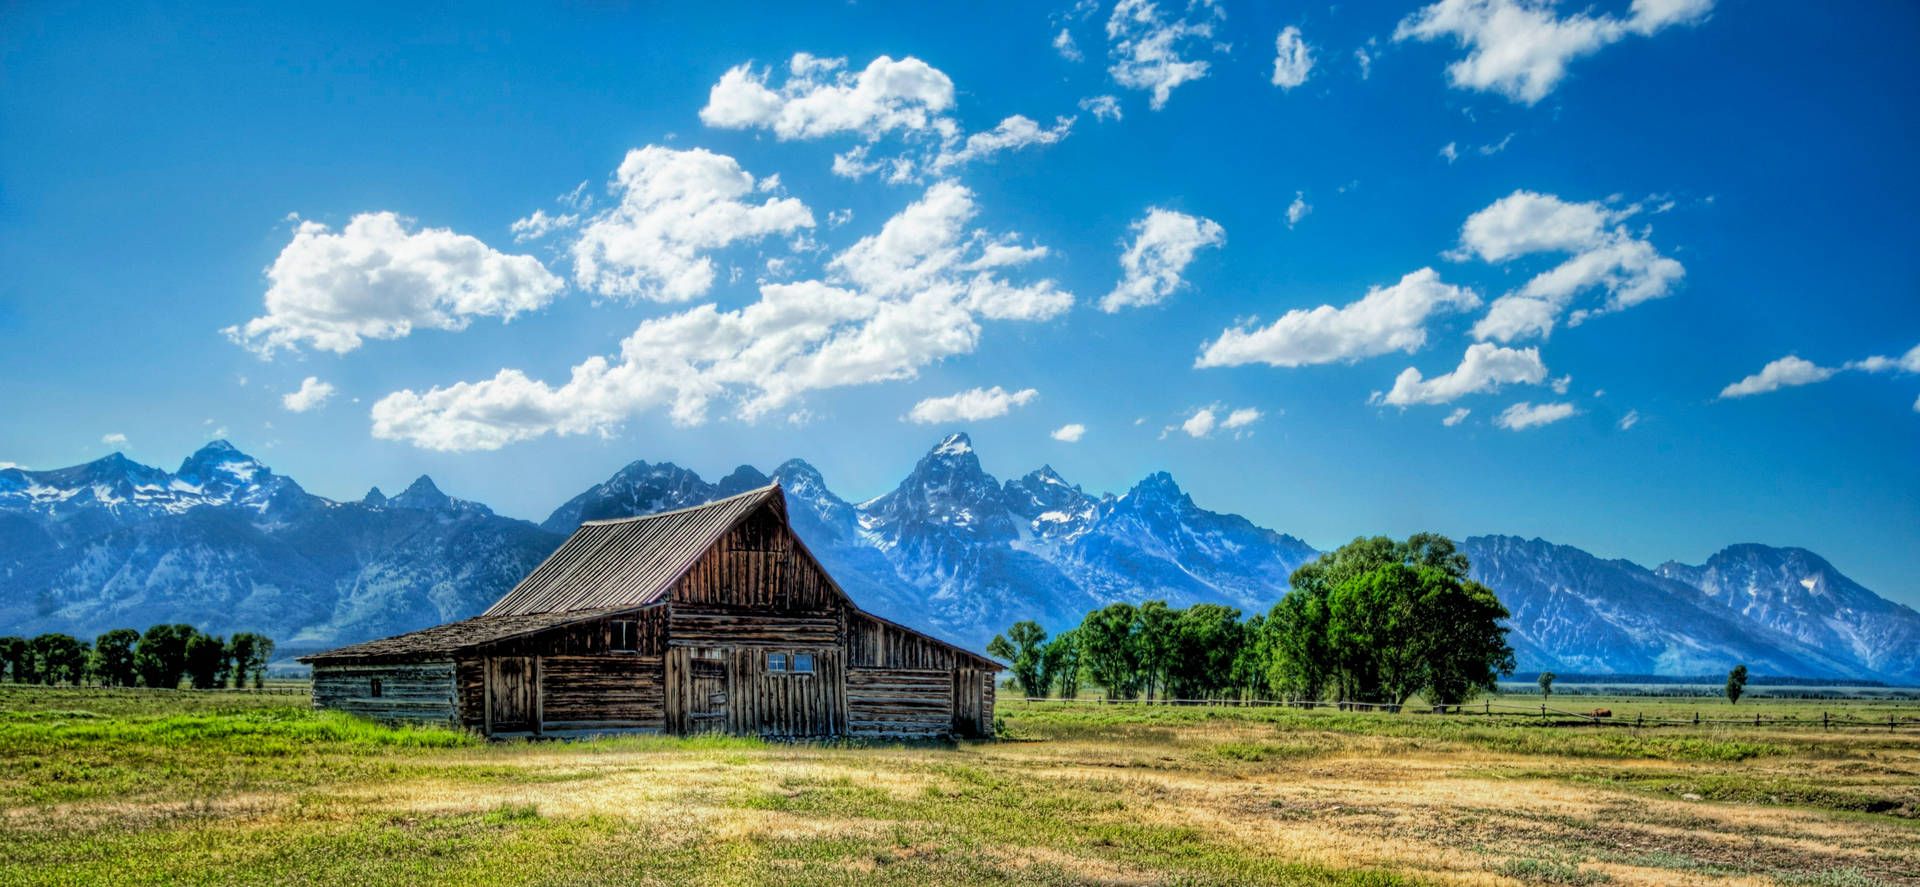 Download Country Summer Wood Cabin Mountains Wallpaper